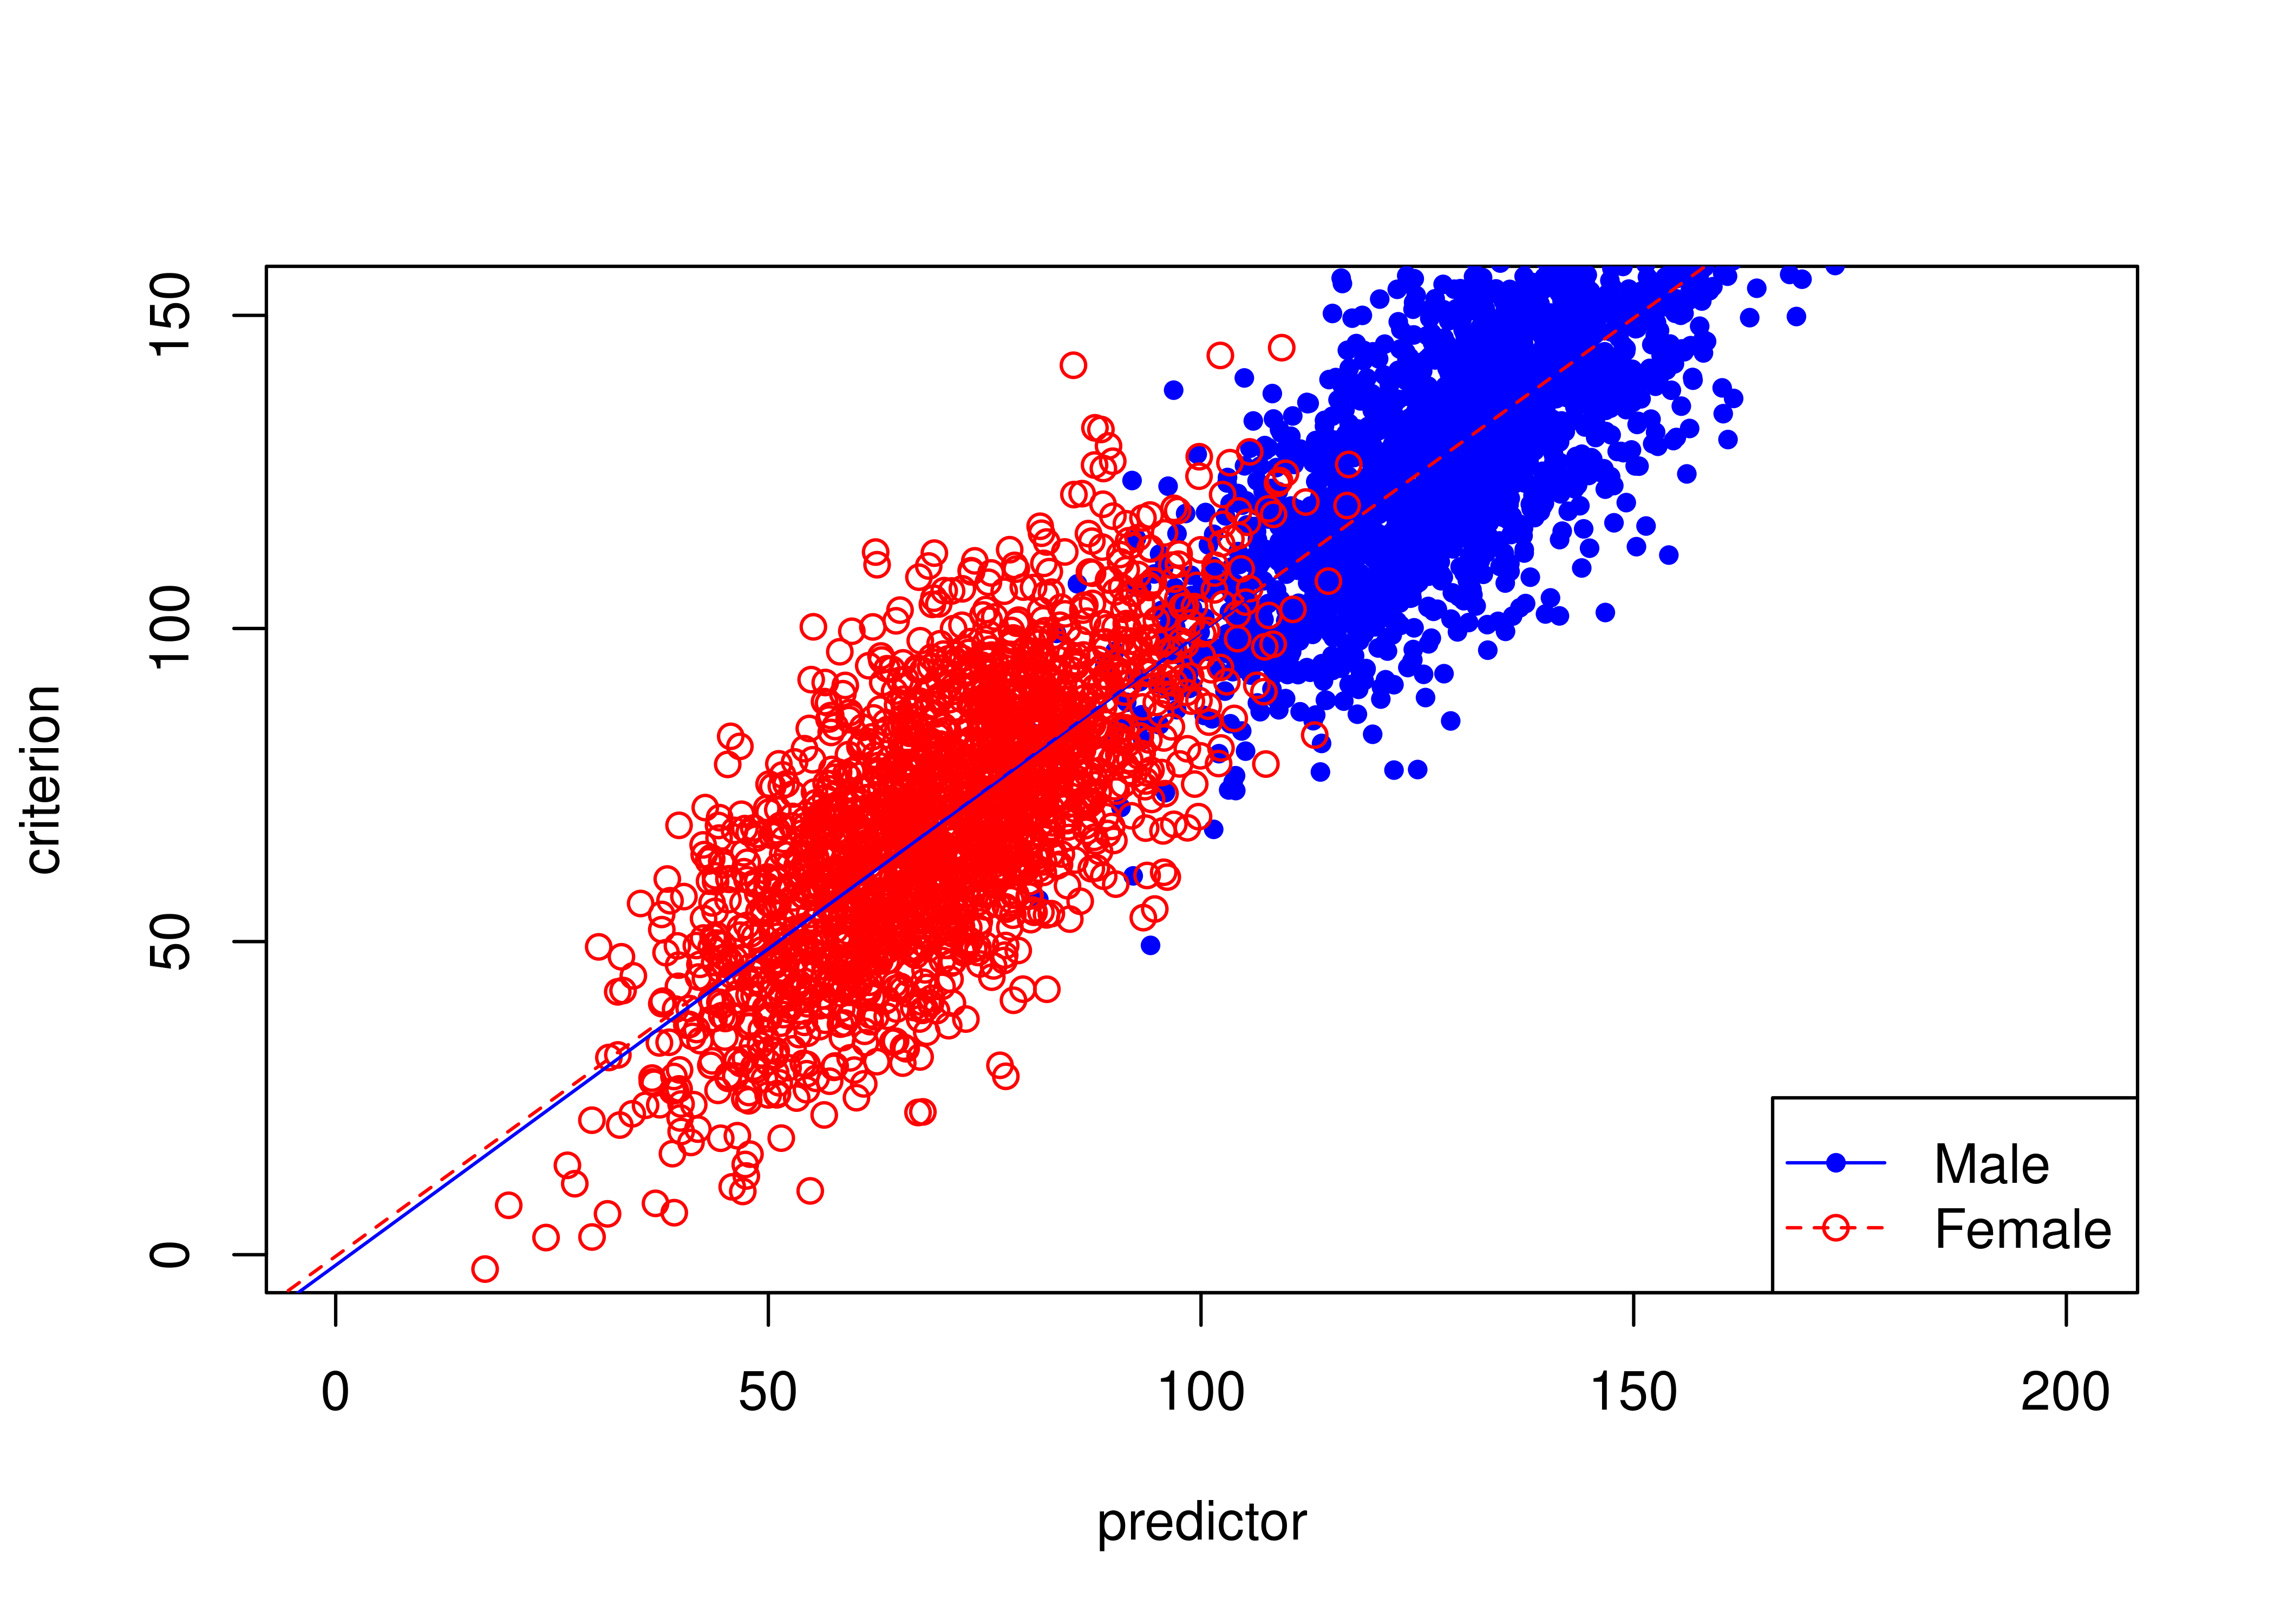 Unbiased Test Where Males Have Higher Means Than Females on Predictor and Criterion.